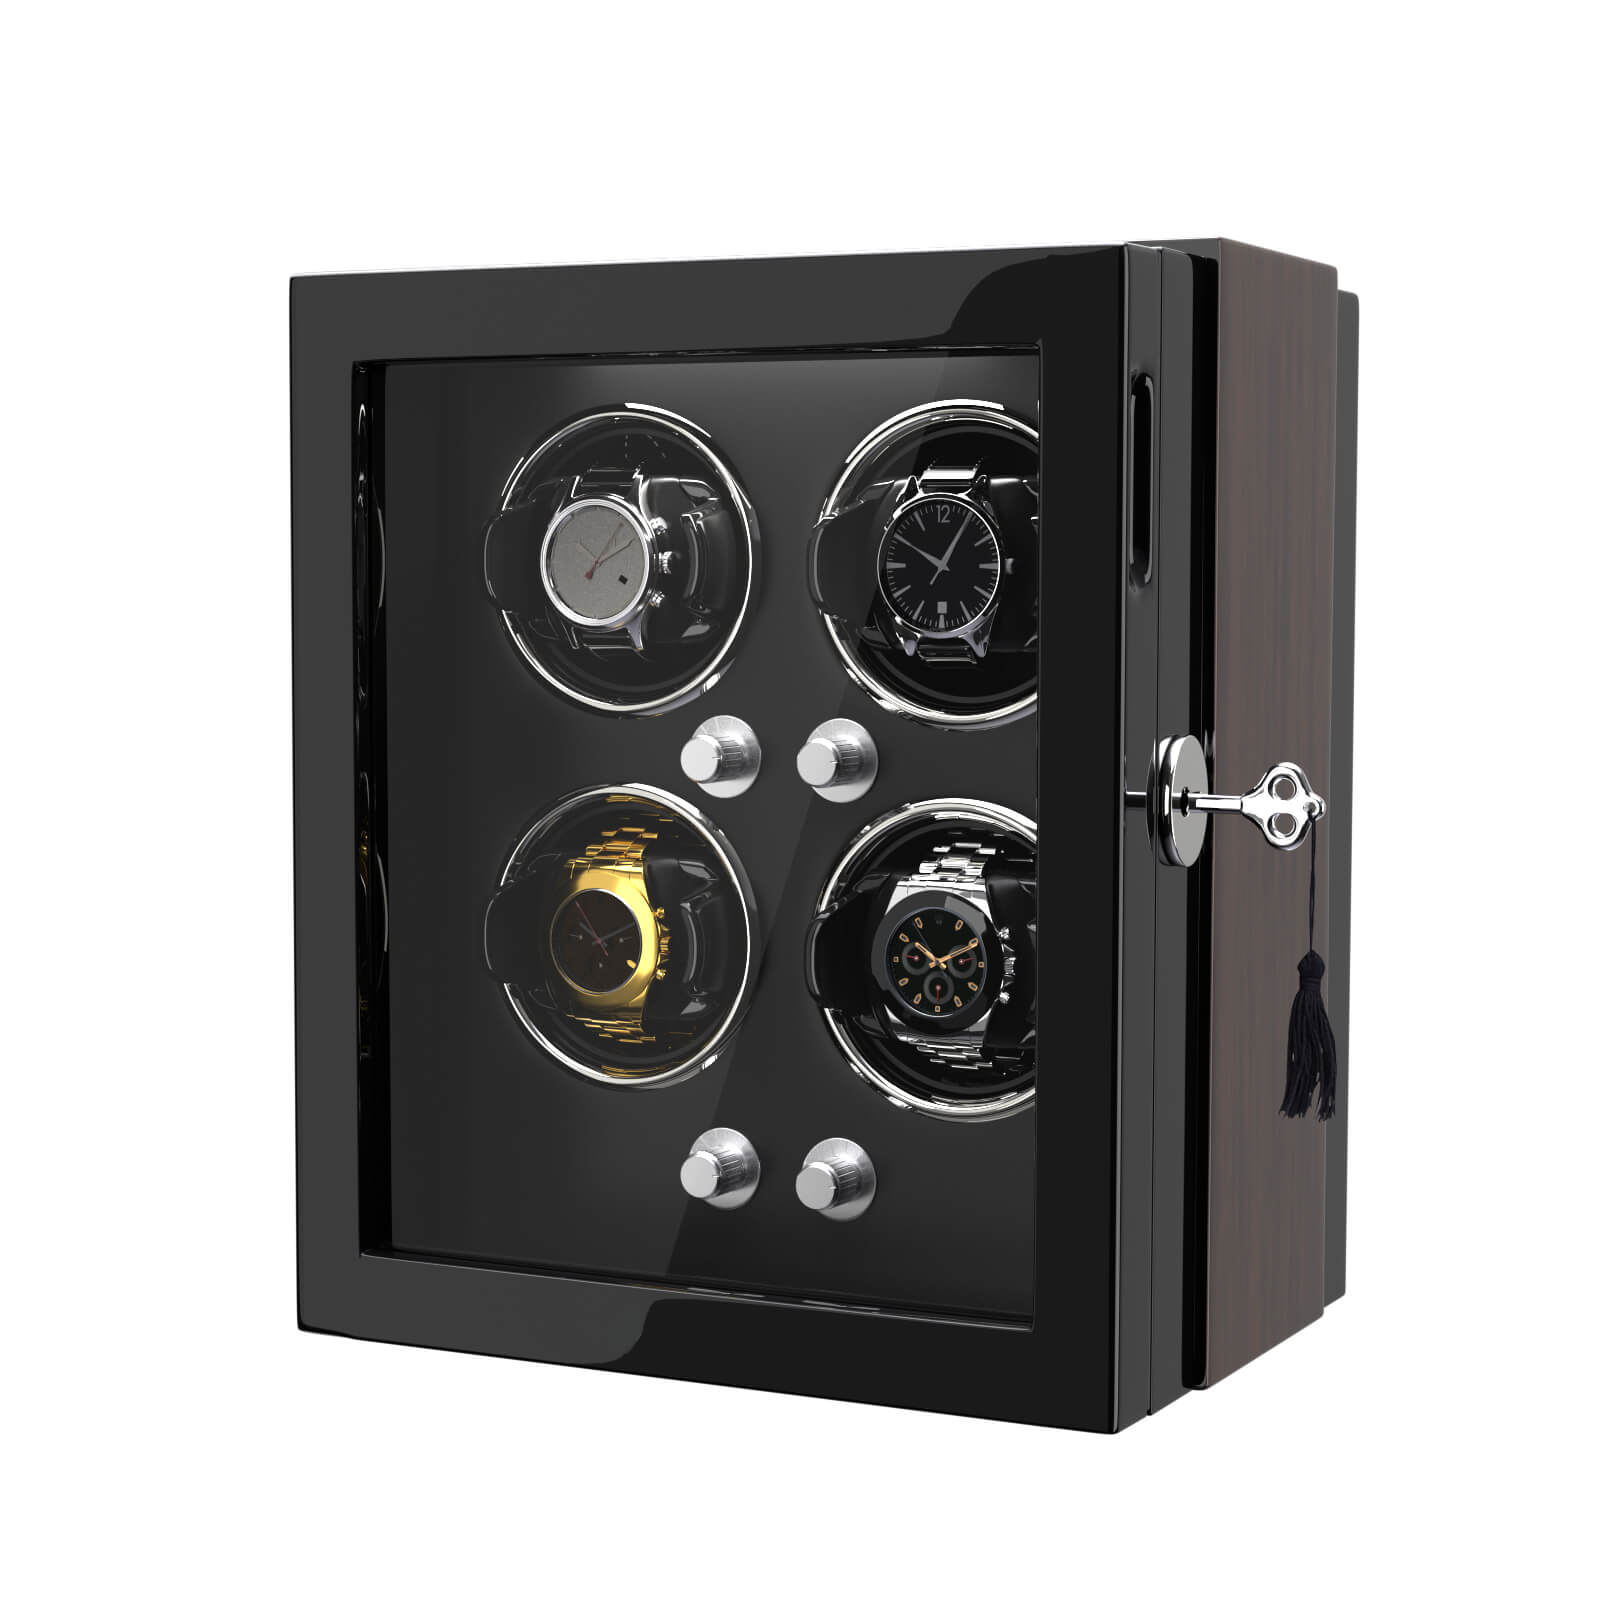 4 Watch Winder for Automatic Watches Quiet Mabuchi Motors with Lock